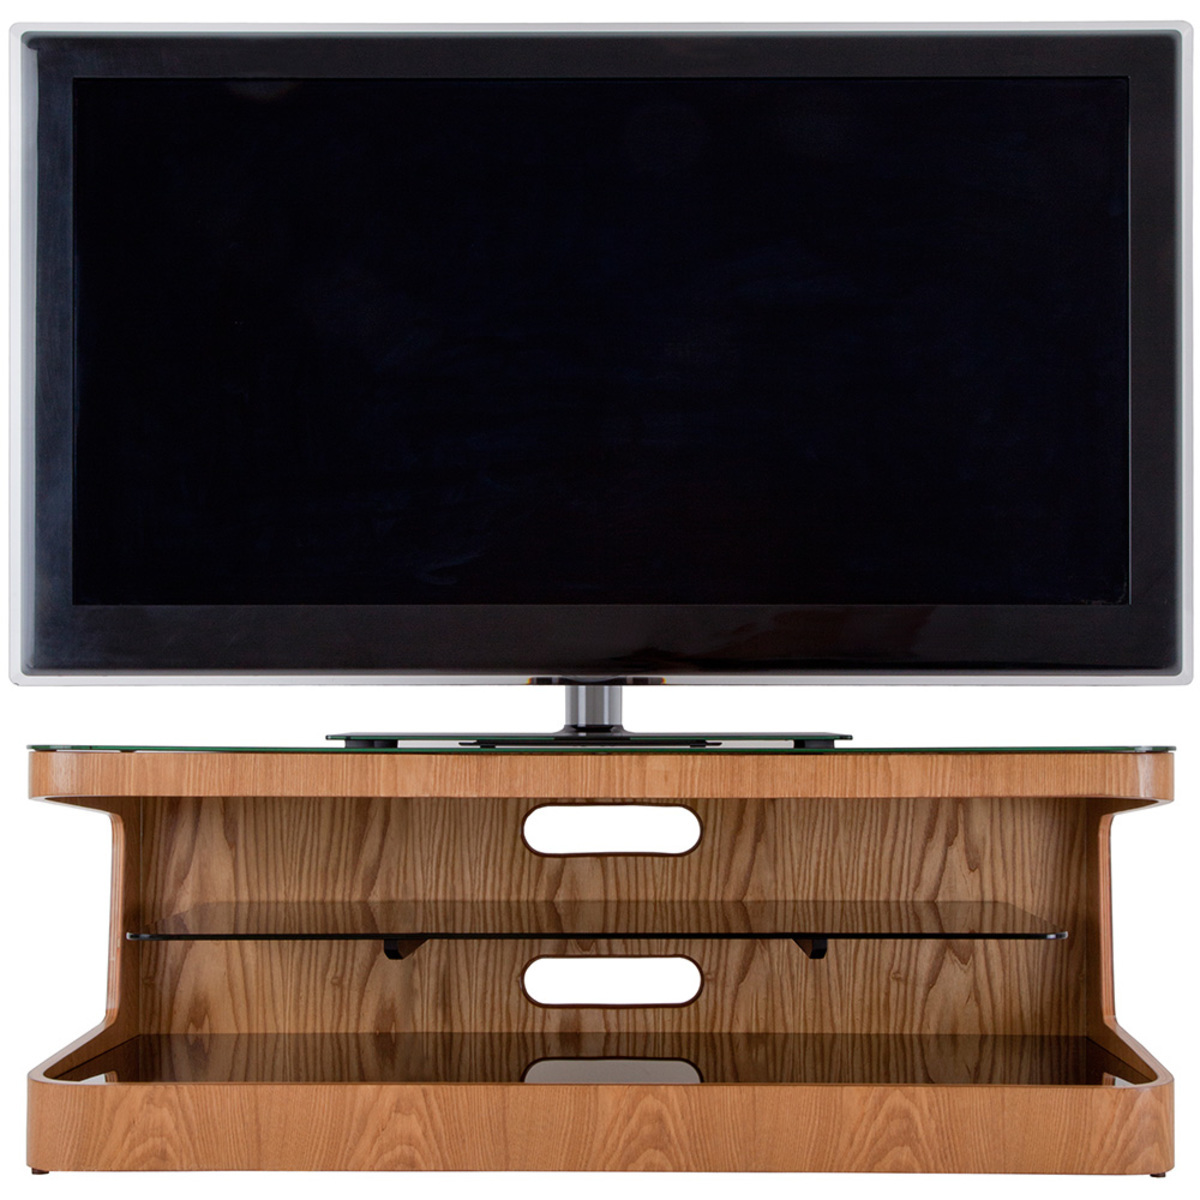 AVF Winchester Affinity 1100 TV Stand for TVS up to 55”, Oak